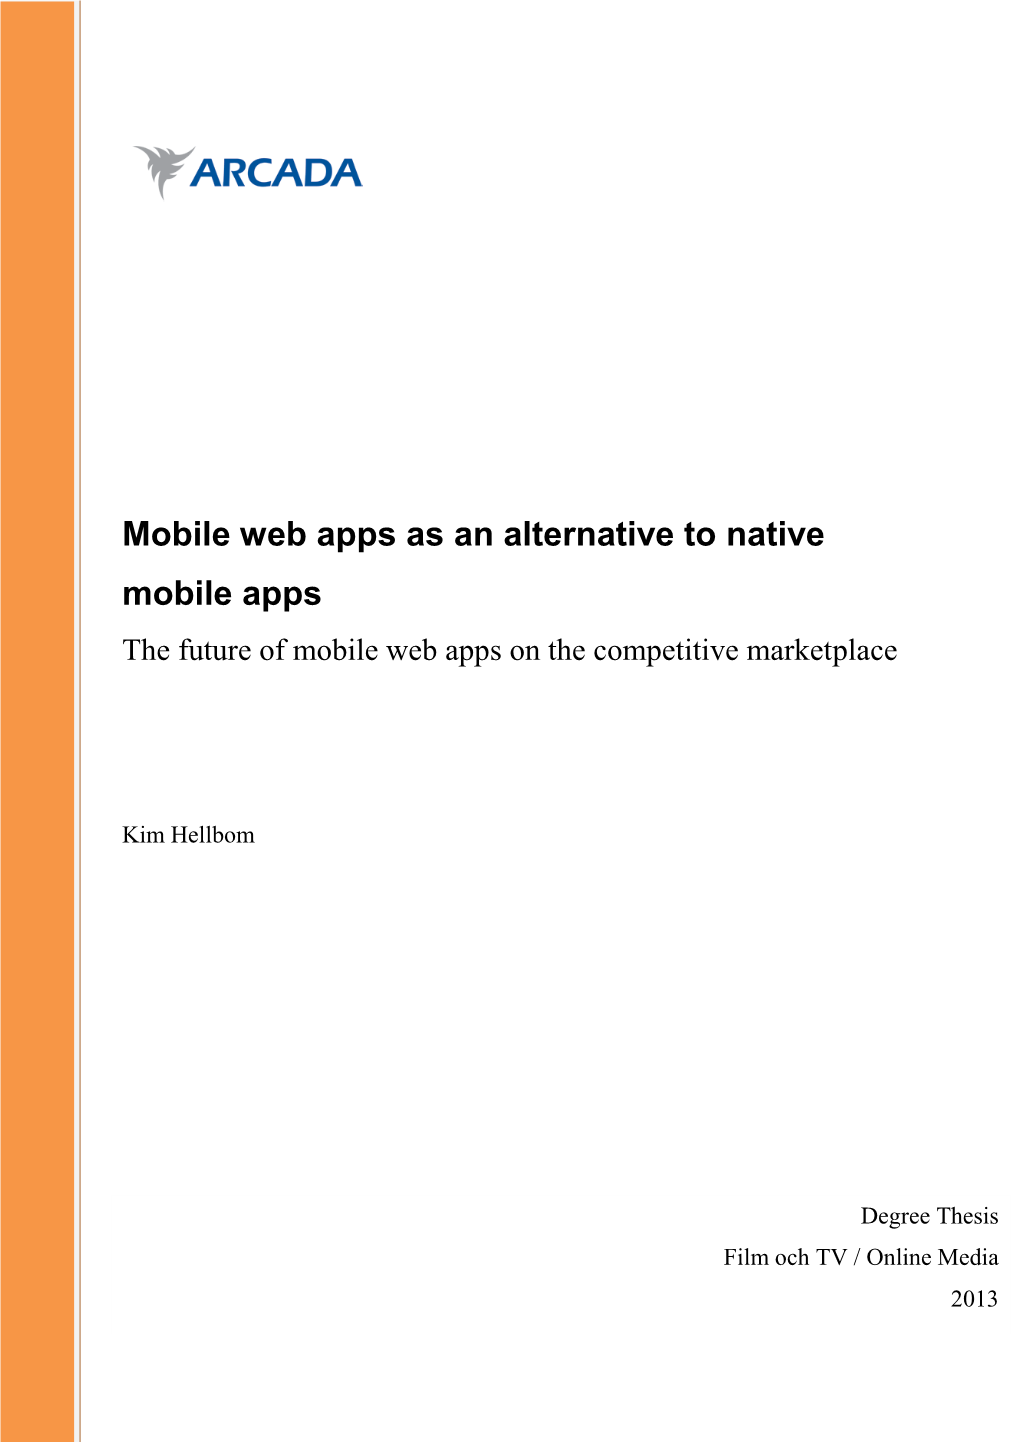 Mobile Web Apps As an Alternative to Native Mobile Apps the Future of Mobile Web Apps on the Competitive Marketplace